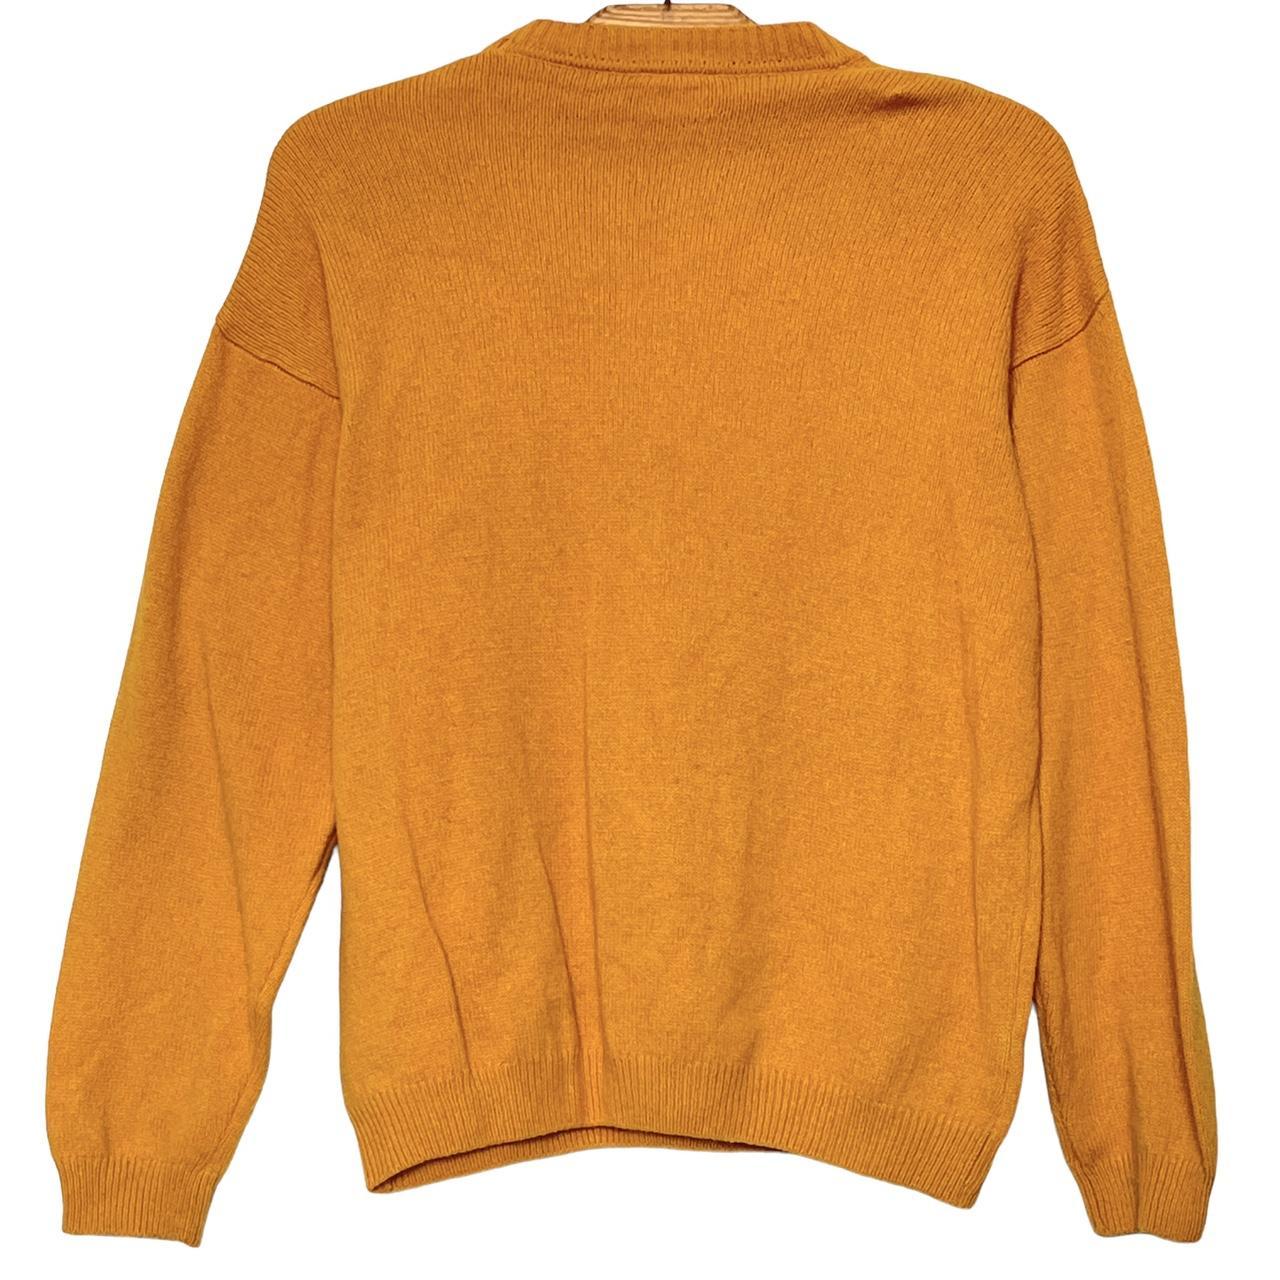 Product Image 3 - Lacoste orange wool sweater very